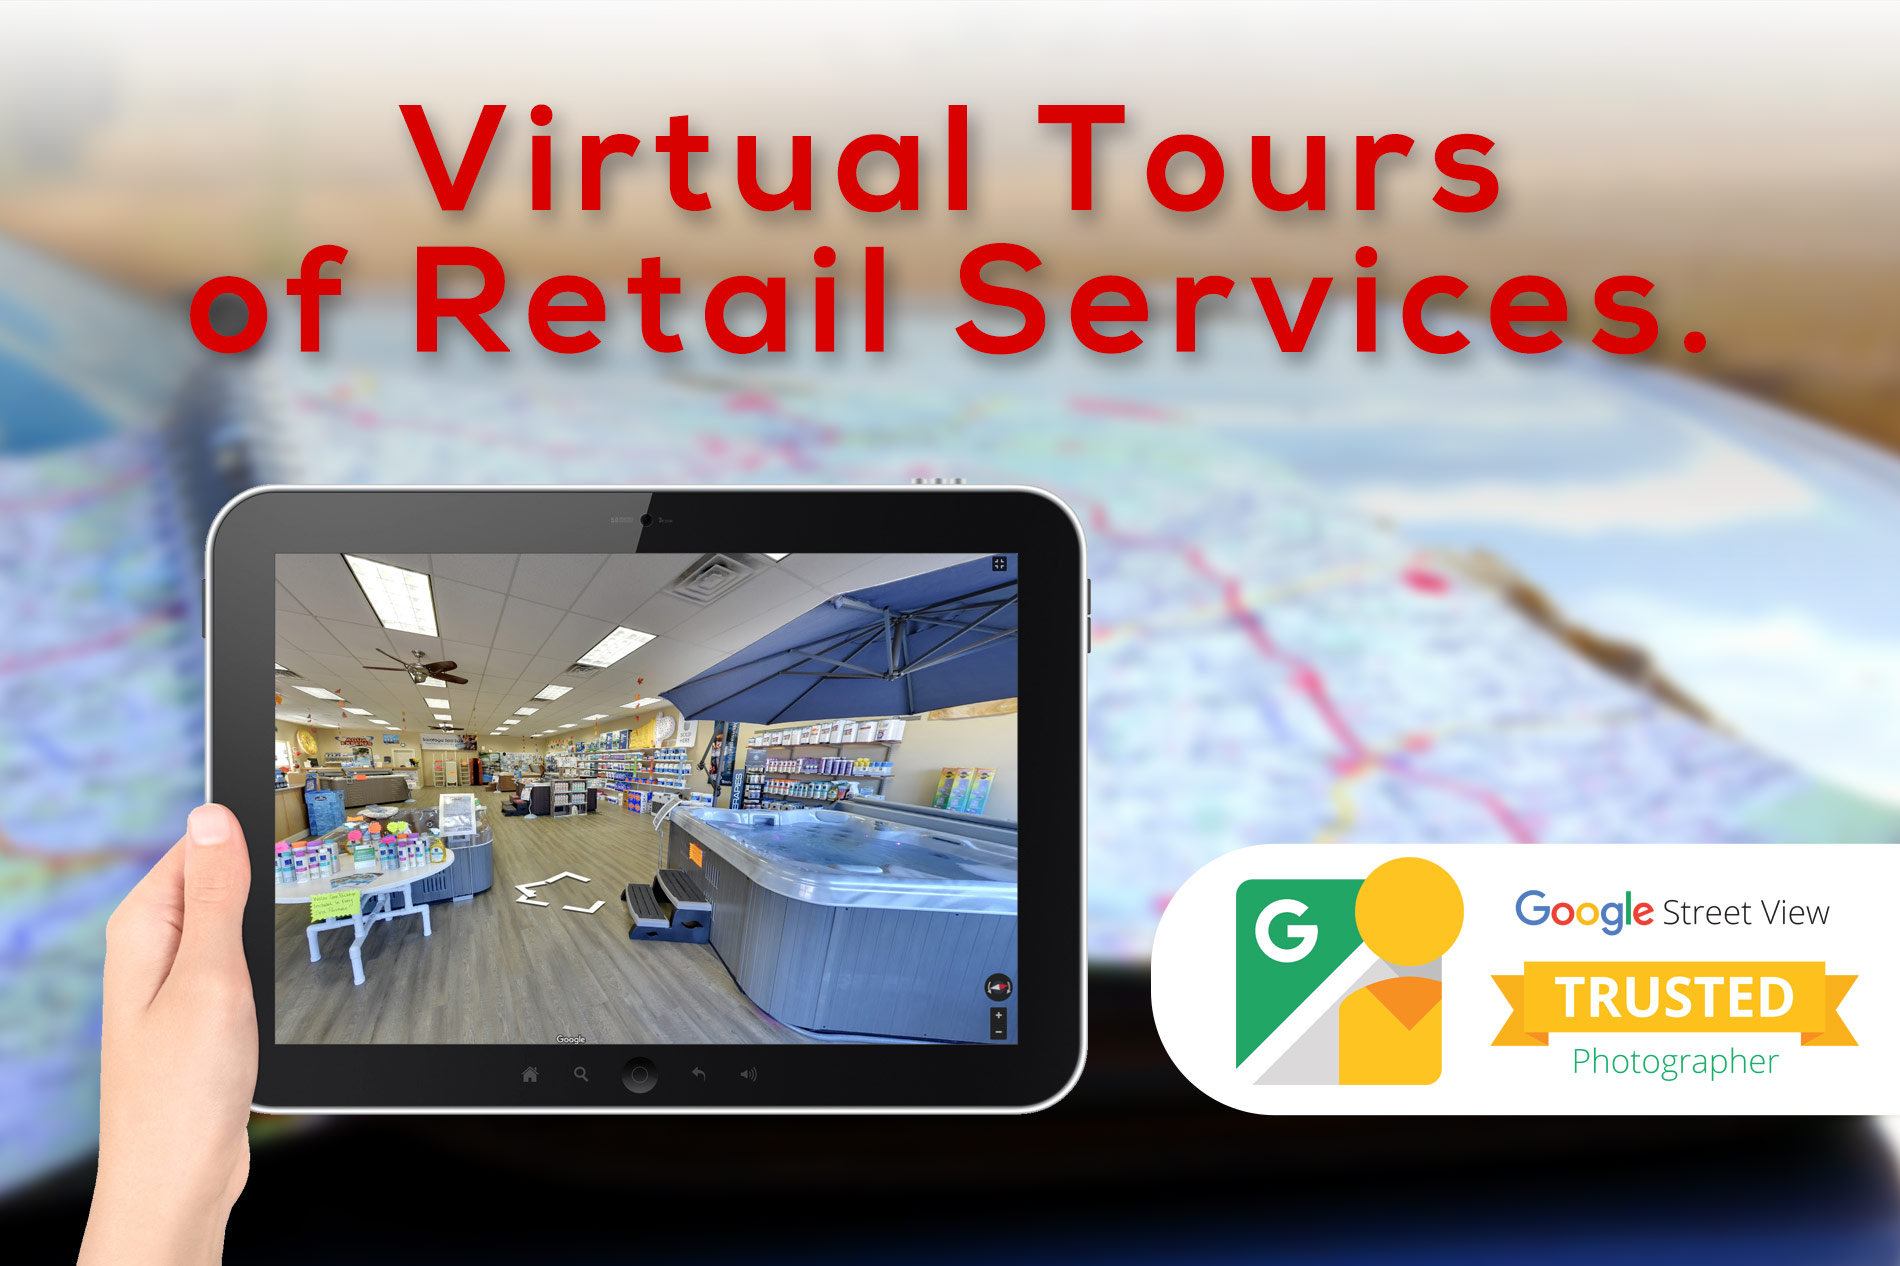 Virtual-Tours-of-Retail-Services Services - Make it Active, LLC - Results from #14